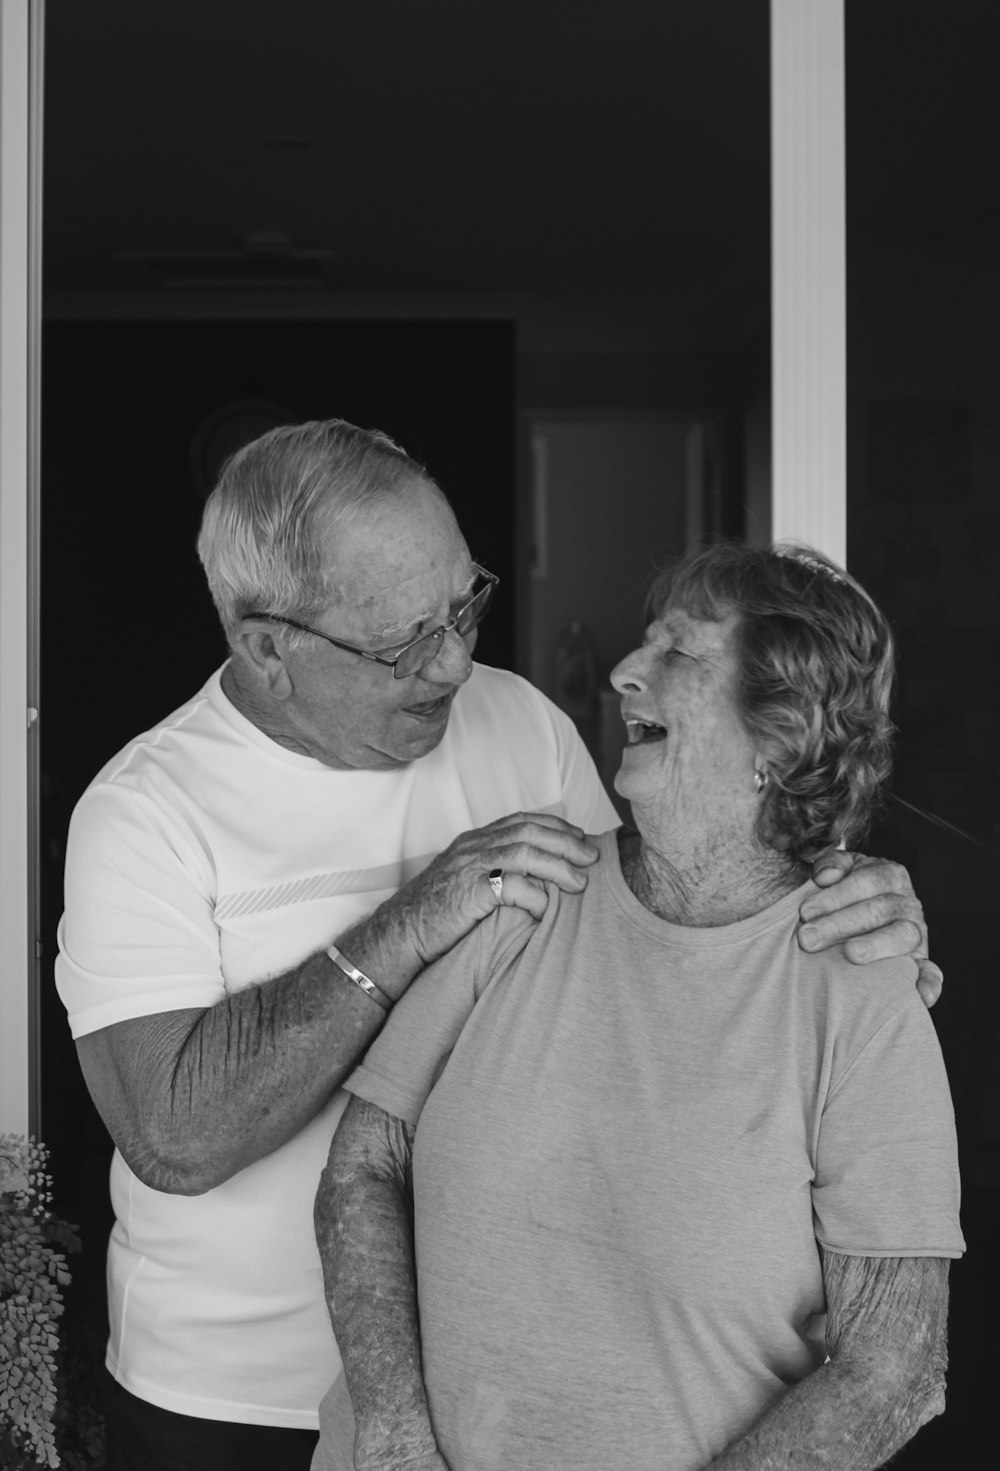 an older man helping a younger woman put on her shirt